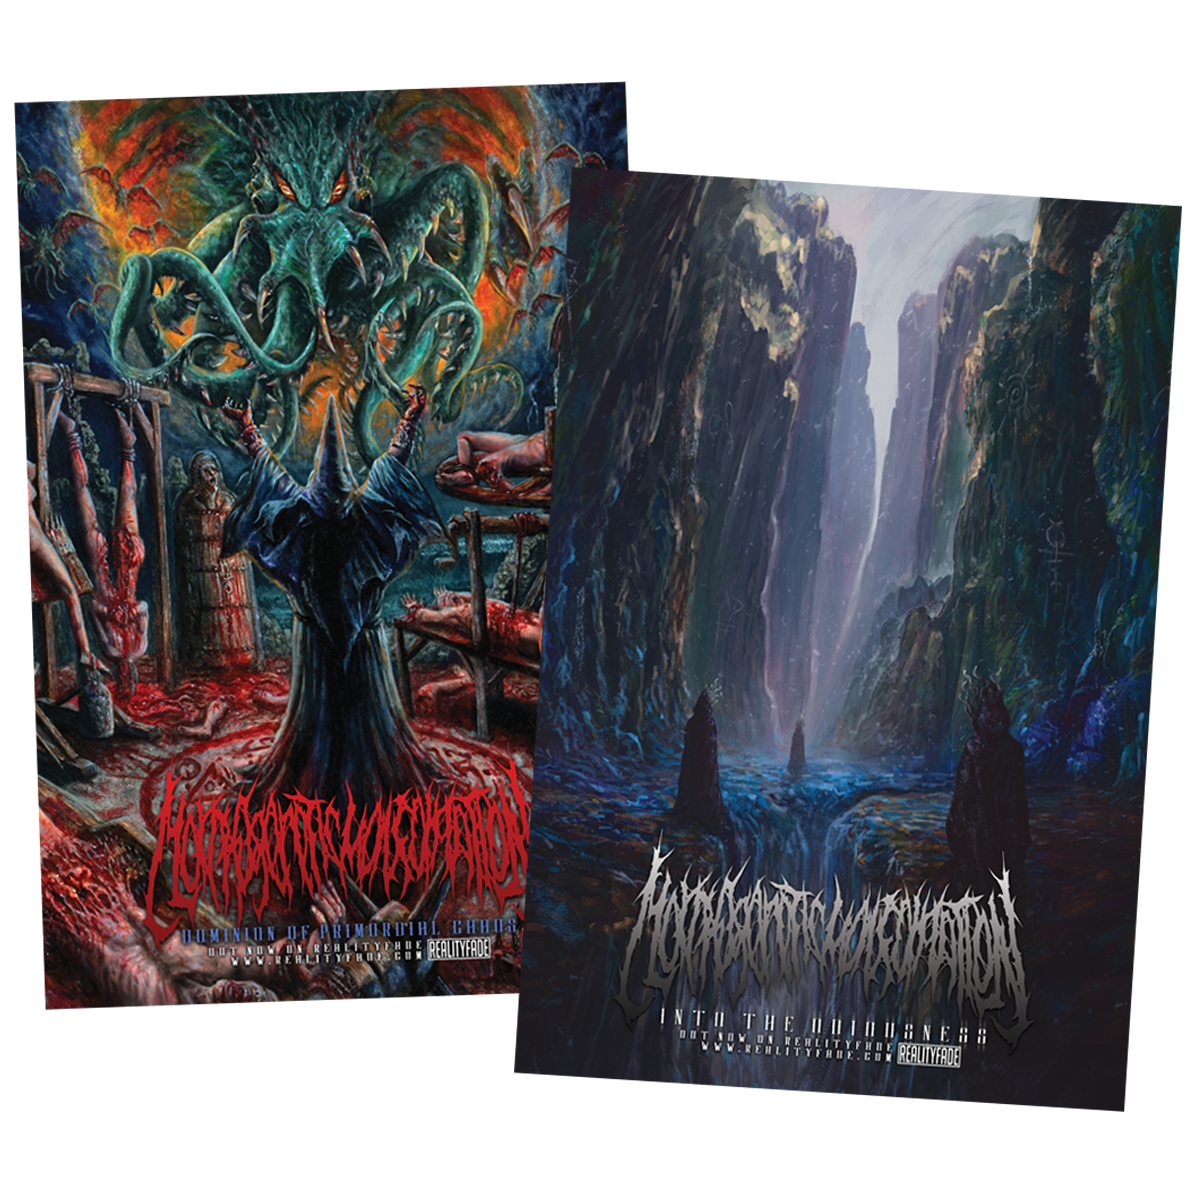 Morphogenetic Malformation 'Into The Odiousness' Poster